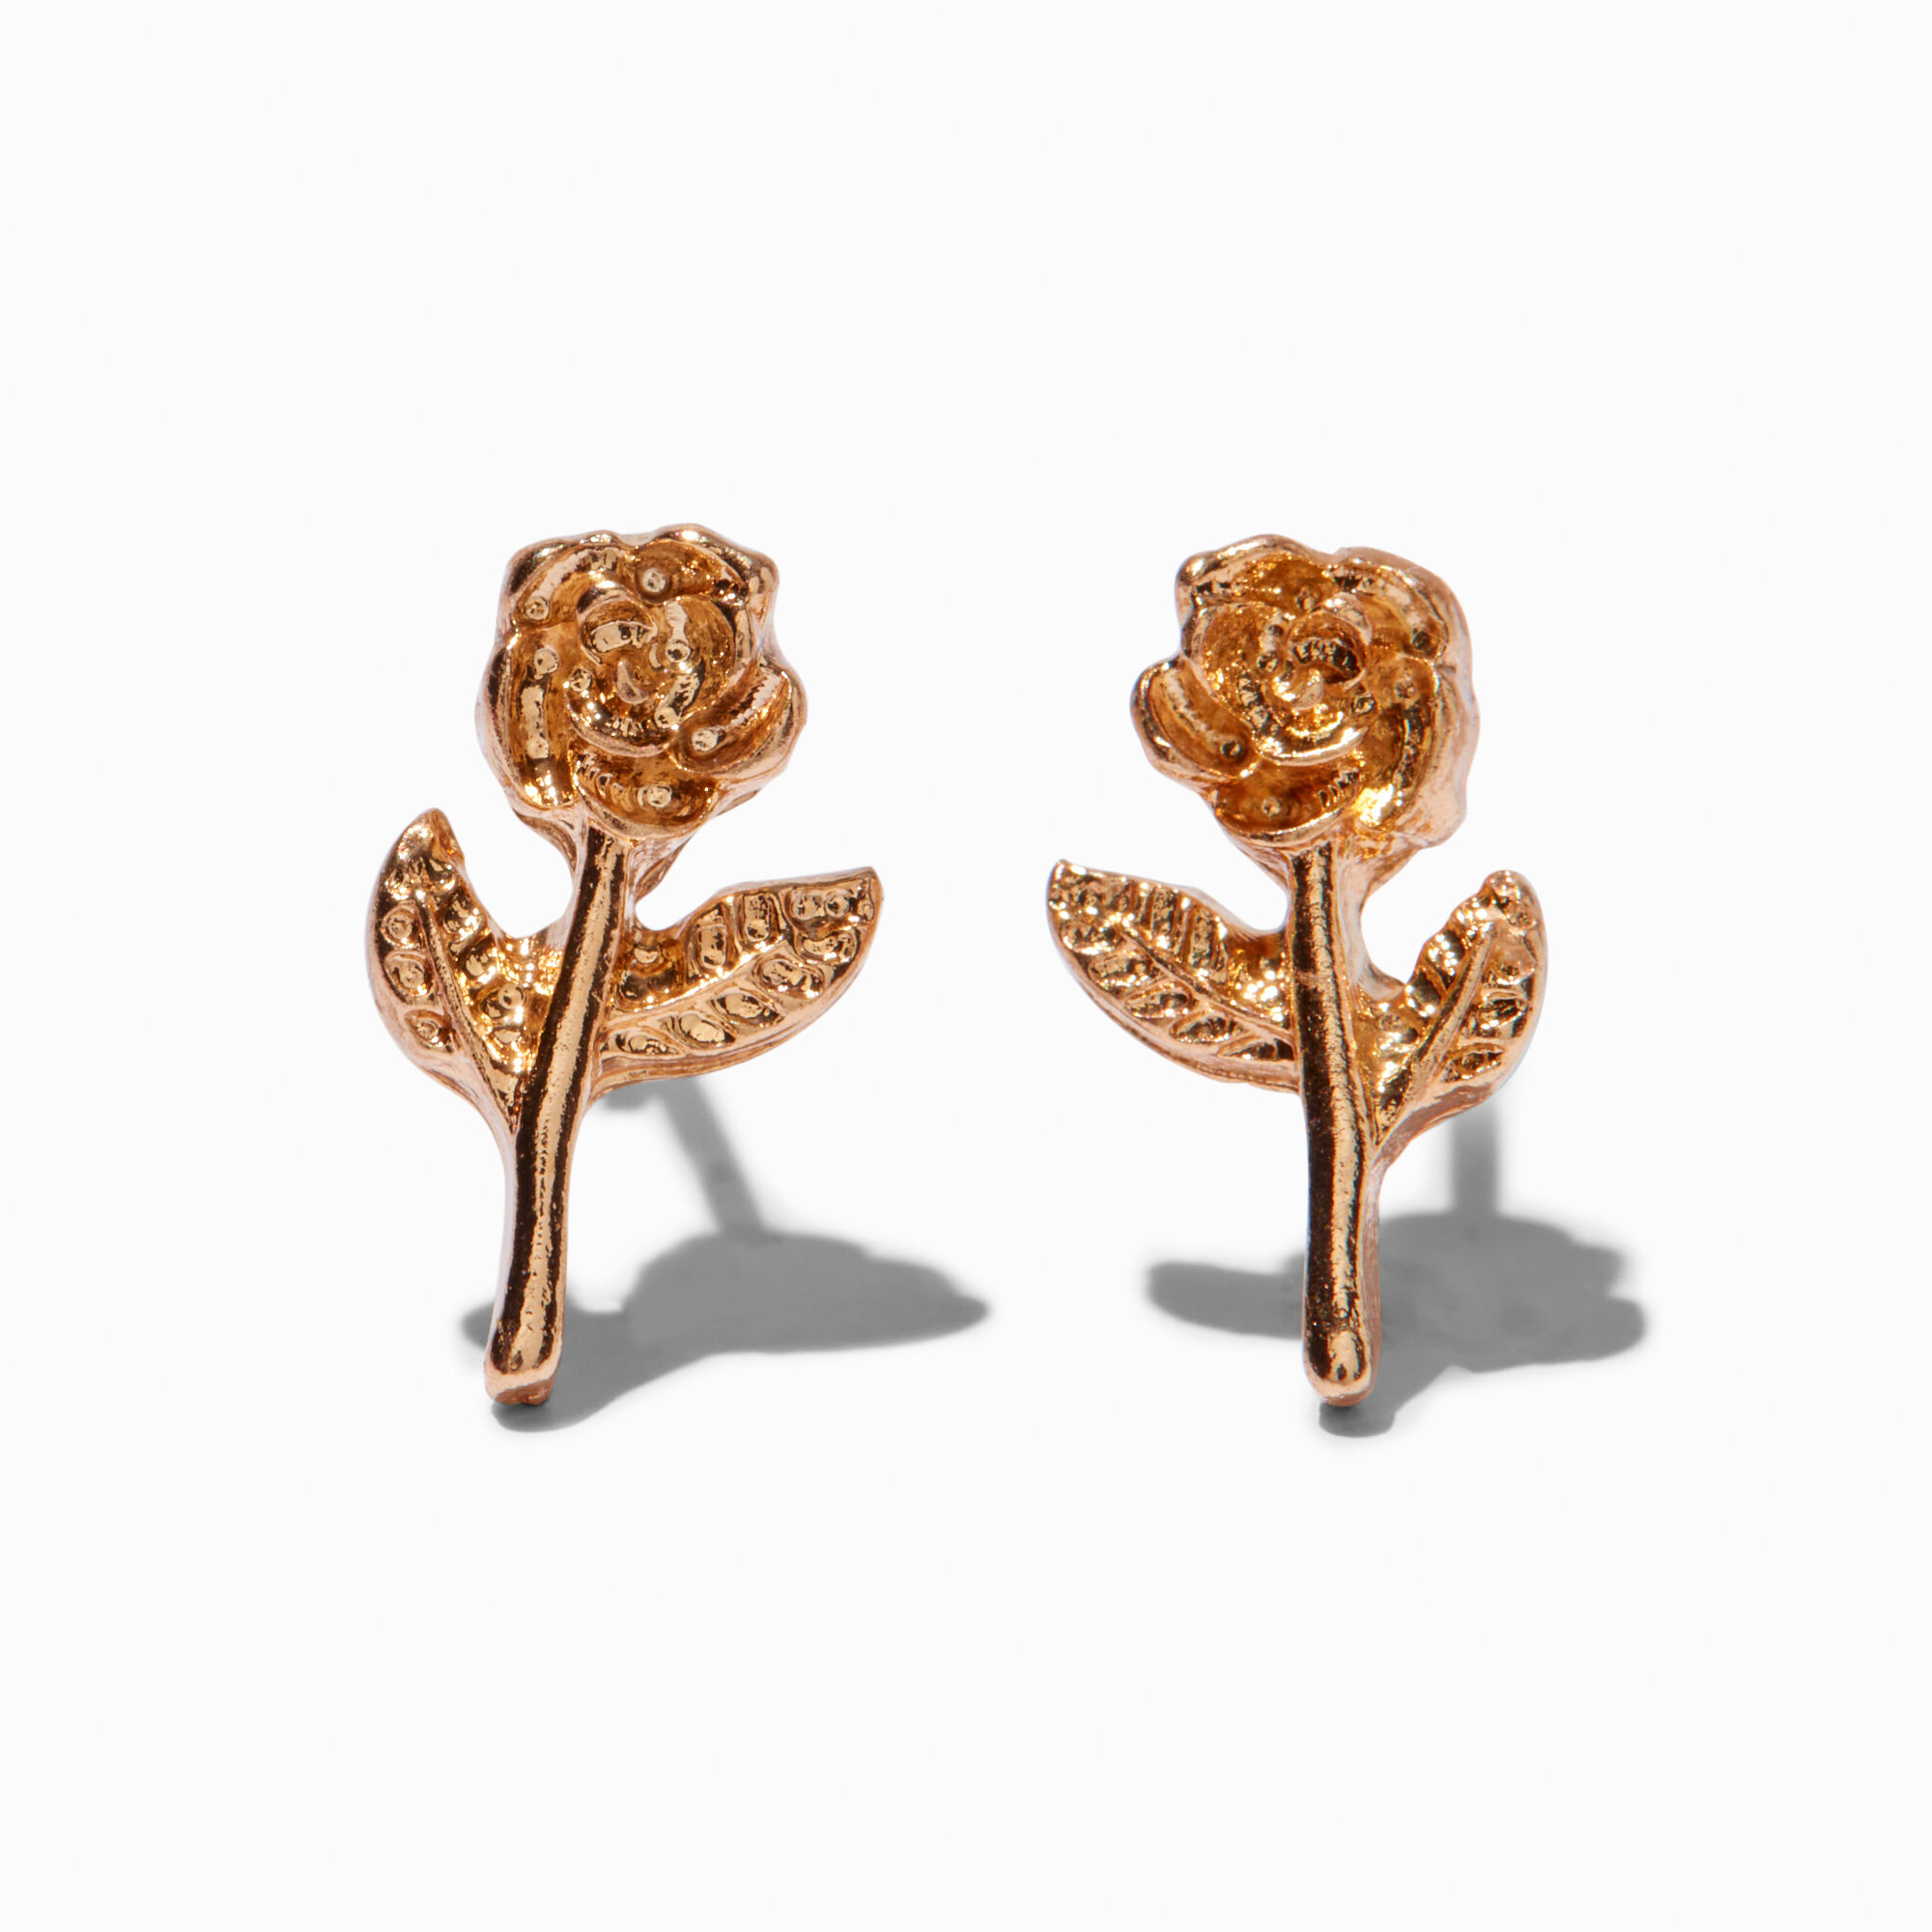 View Claires Tone Rose Stem Stud Earrings Gold information